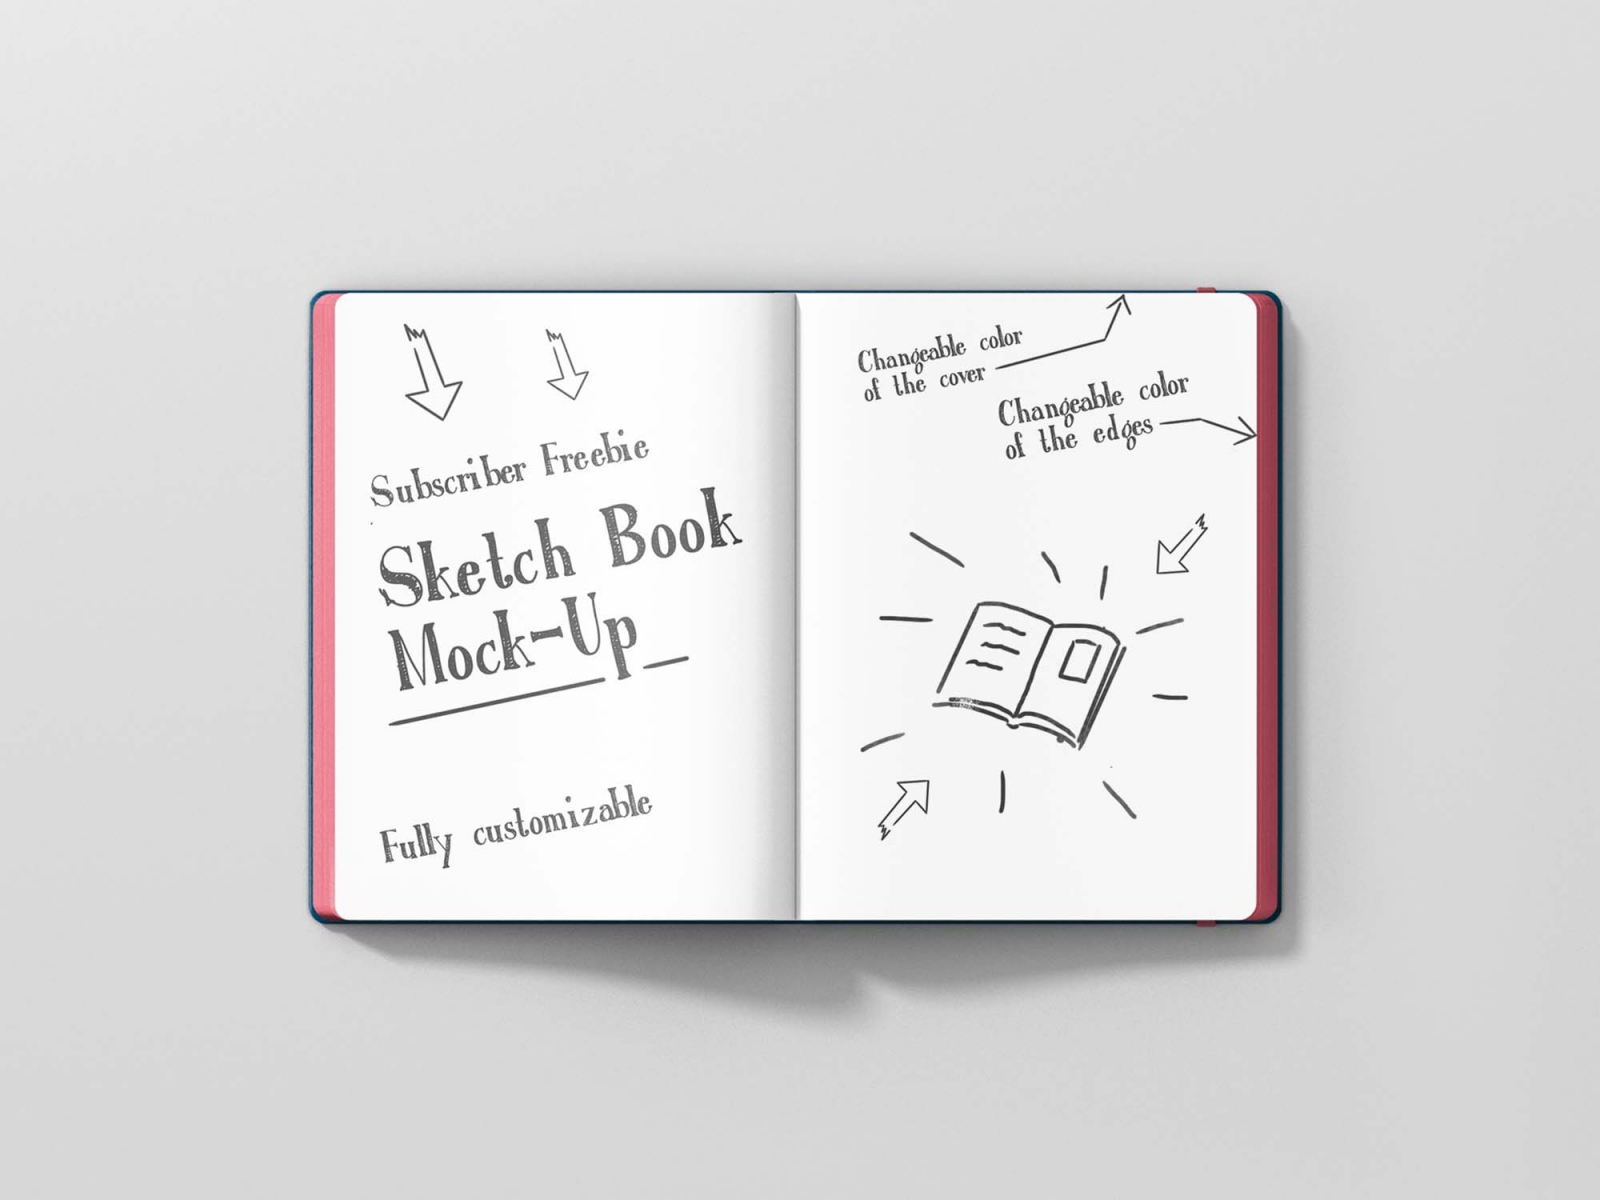 An open sketchbook mockup on a neutral background, showcasing an editable cover and page design with sample text and graphics.